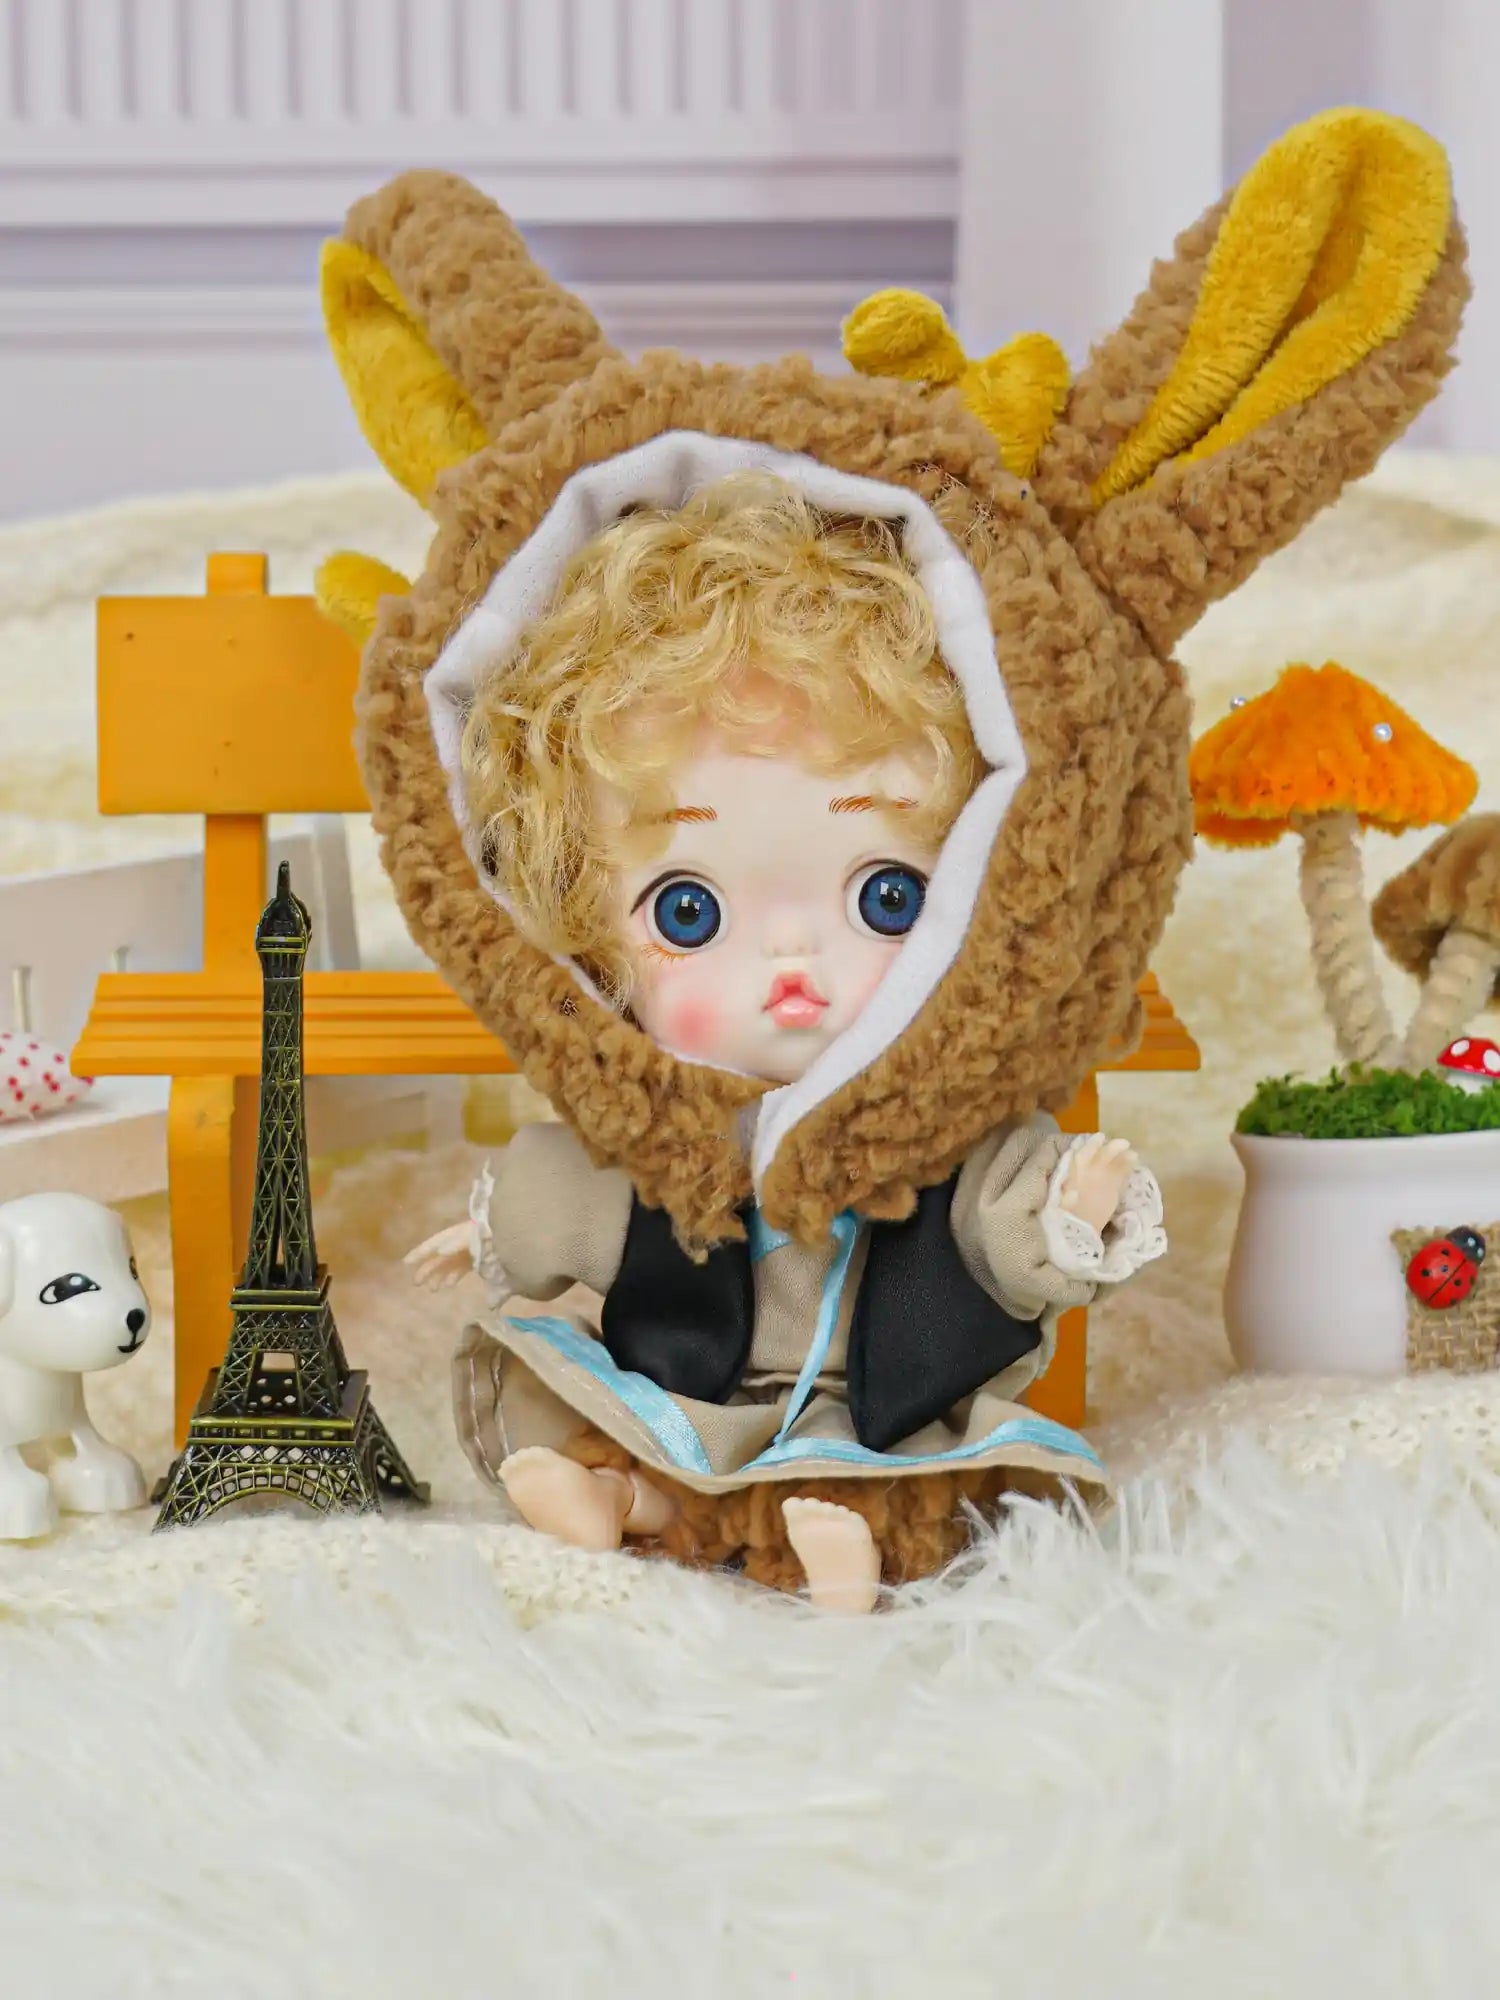 A whimsical ball-jointed doll with a rabbit hood and golden curls, surrounded by a toy Eiffel Tower and a small dog figurine.